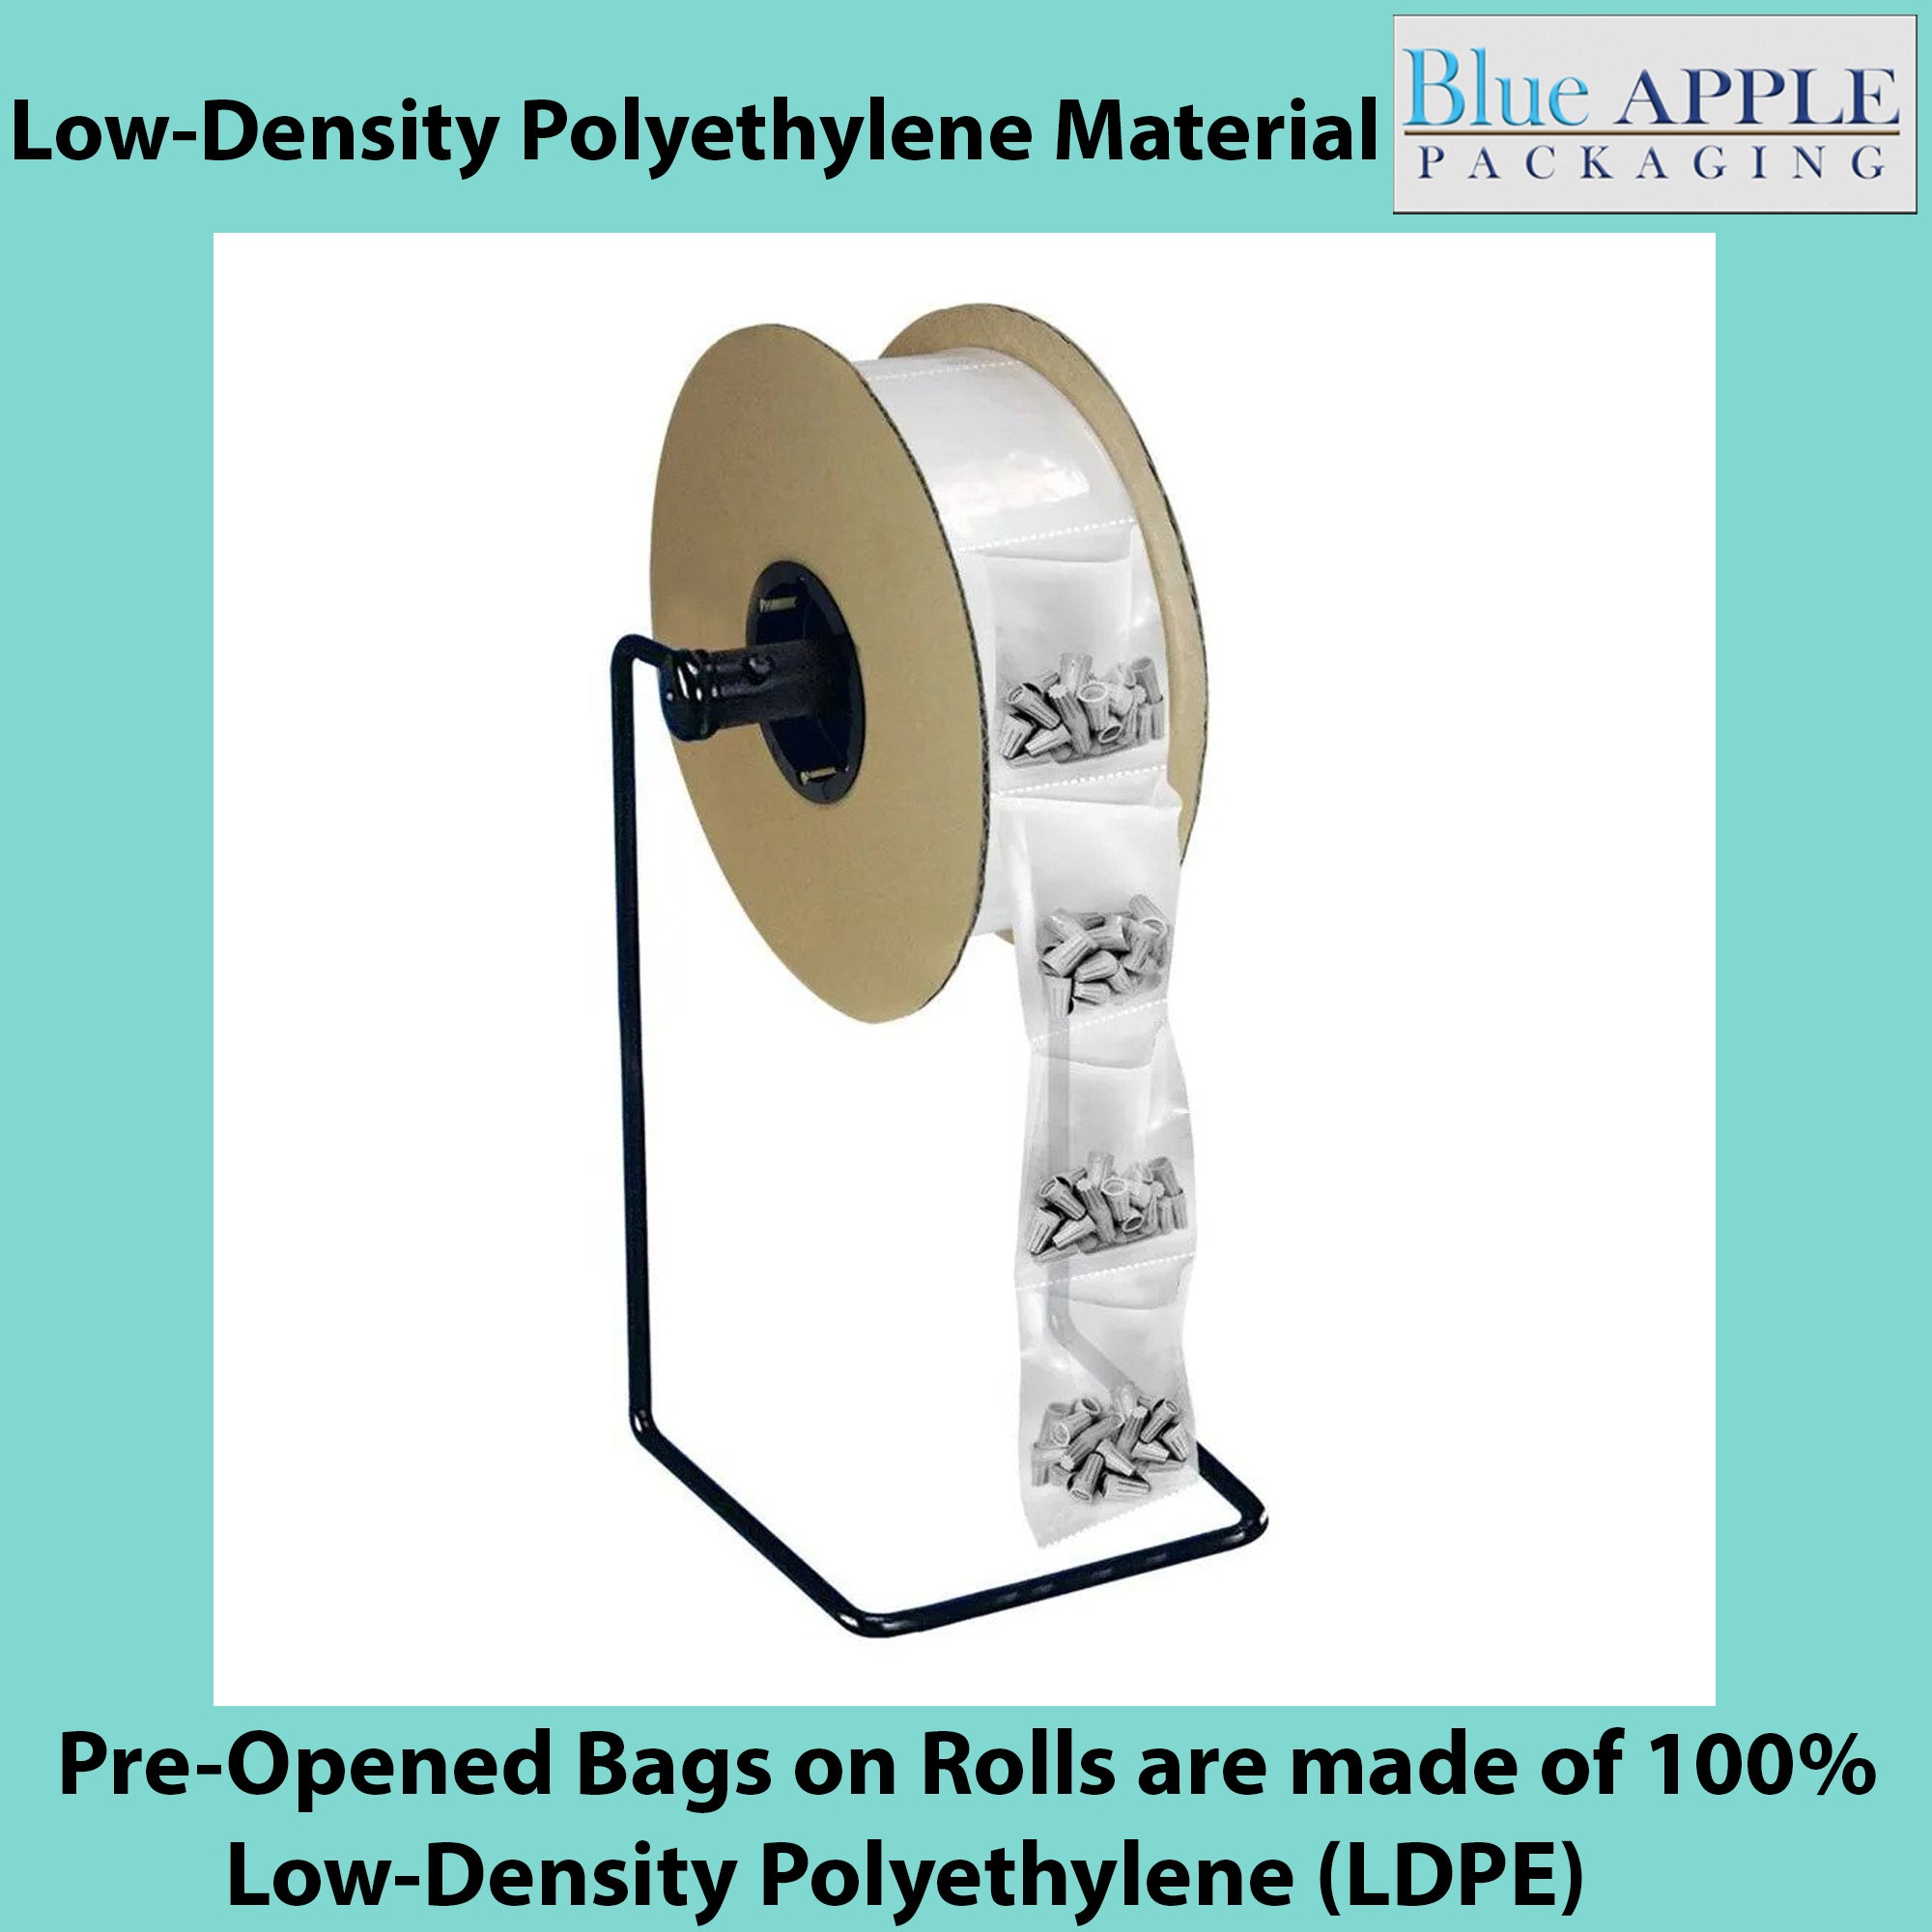 Autobag Heavy Perforated Roll Auto Fill Poly Bags- 3"x4", 2.75 Mil - 2000 Bags